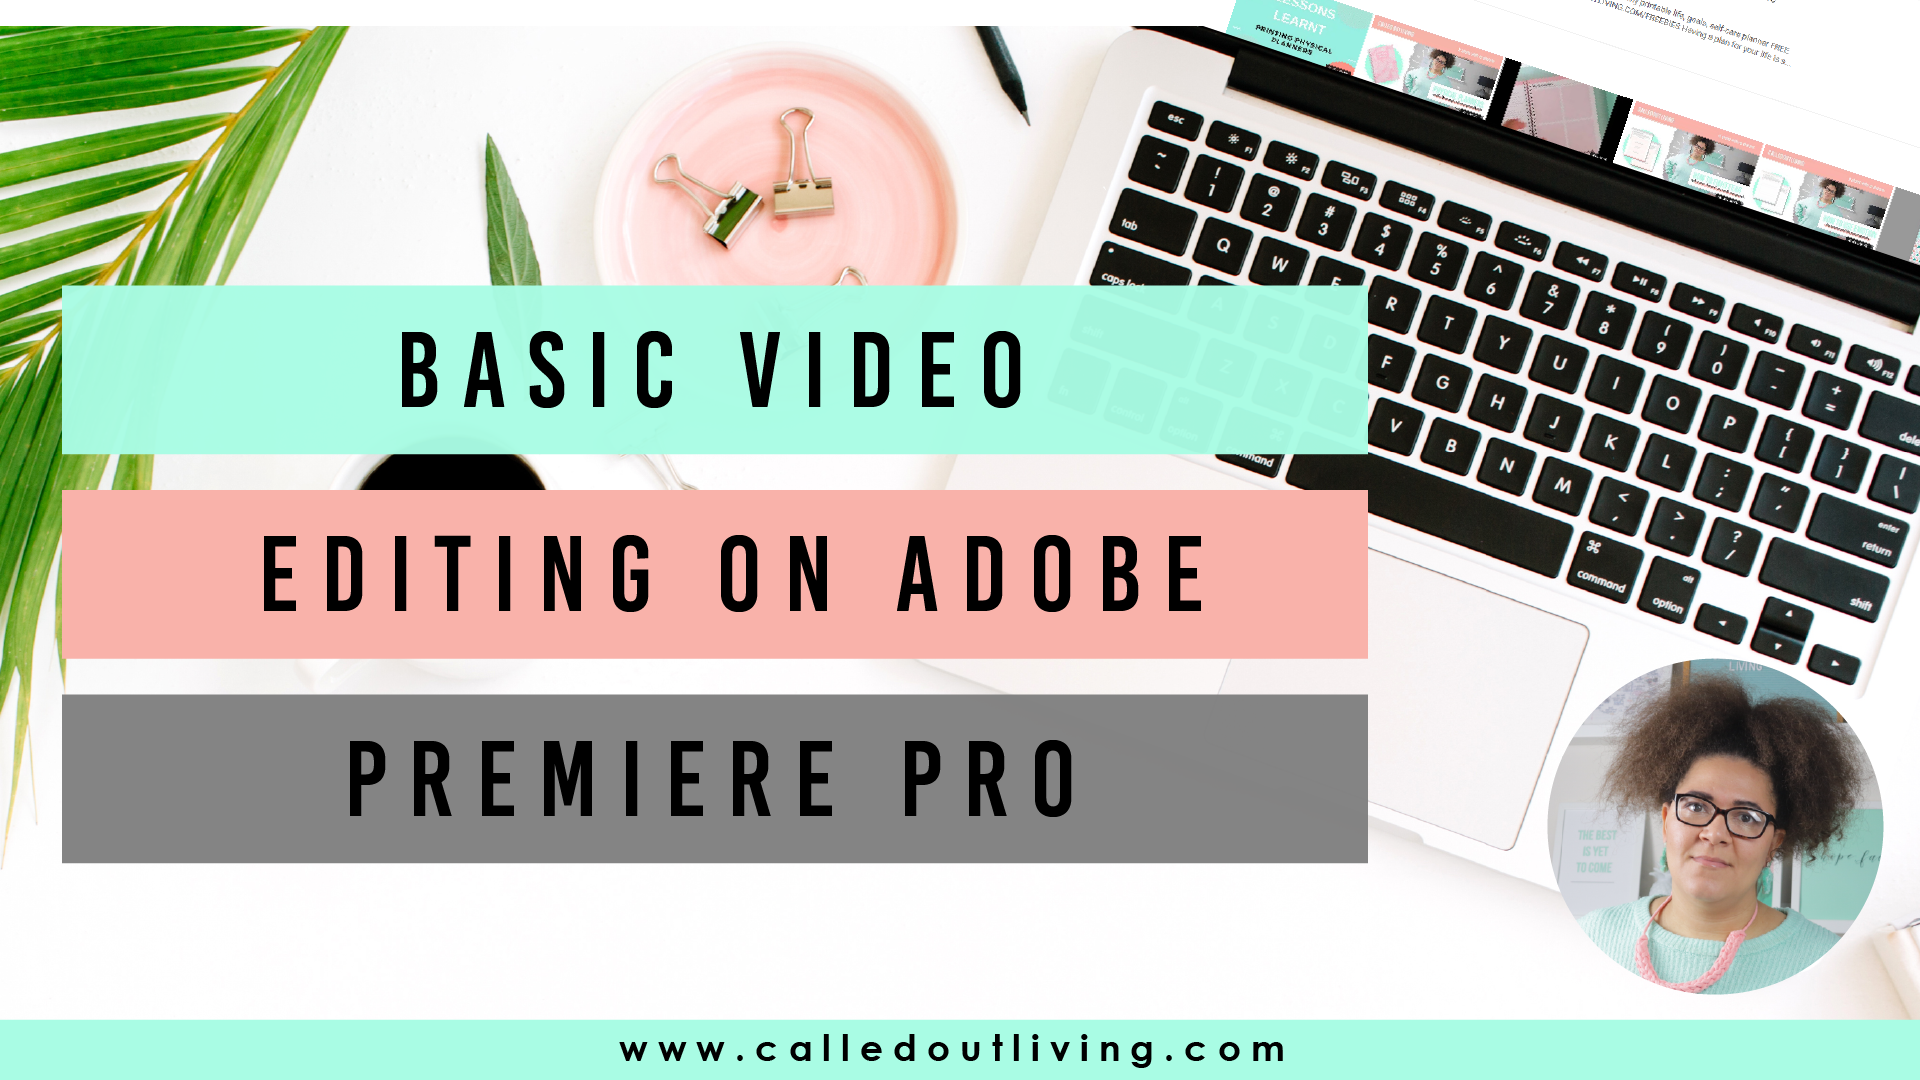 How to use premiere pro to edit youtube videos - basic video editing tips for beginners - use video to market your online business - I created this video teaching you how to ue Premiere pro toe dit your videos for youtube or scoial media - i help creative women make their dreams come true with goal setting, self care, habits, planning and mindset #femaleentrepreneur #videomarketing #youtubemarketing #howtovideo #edityourvideo